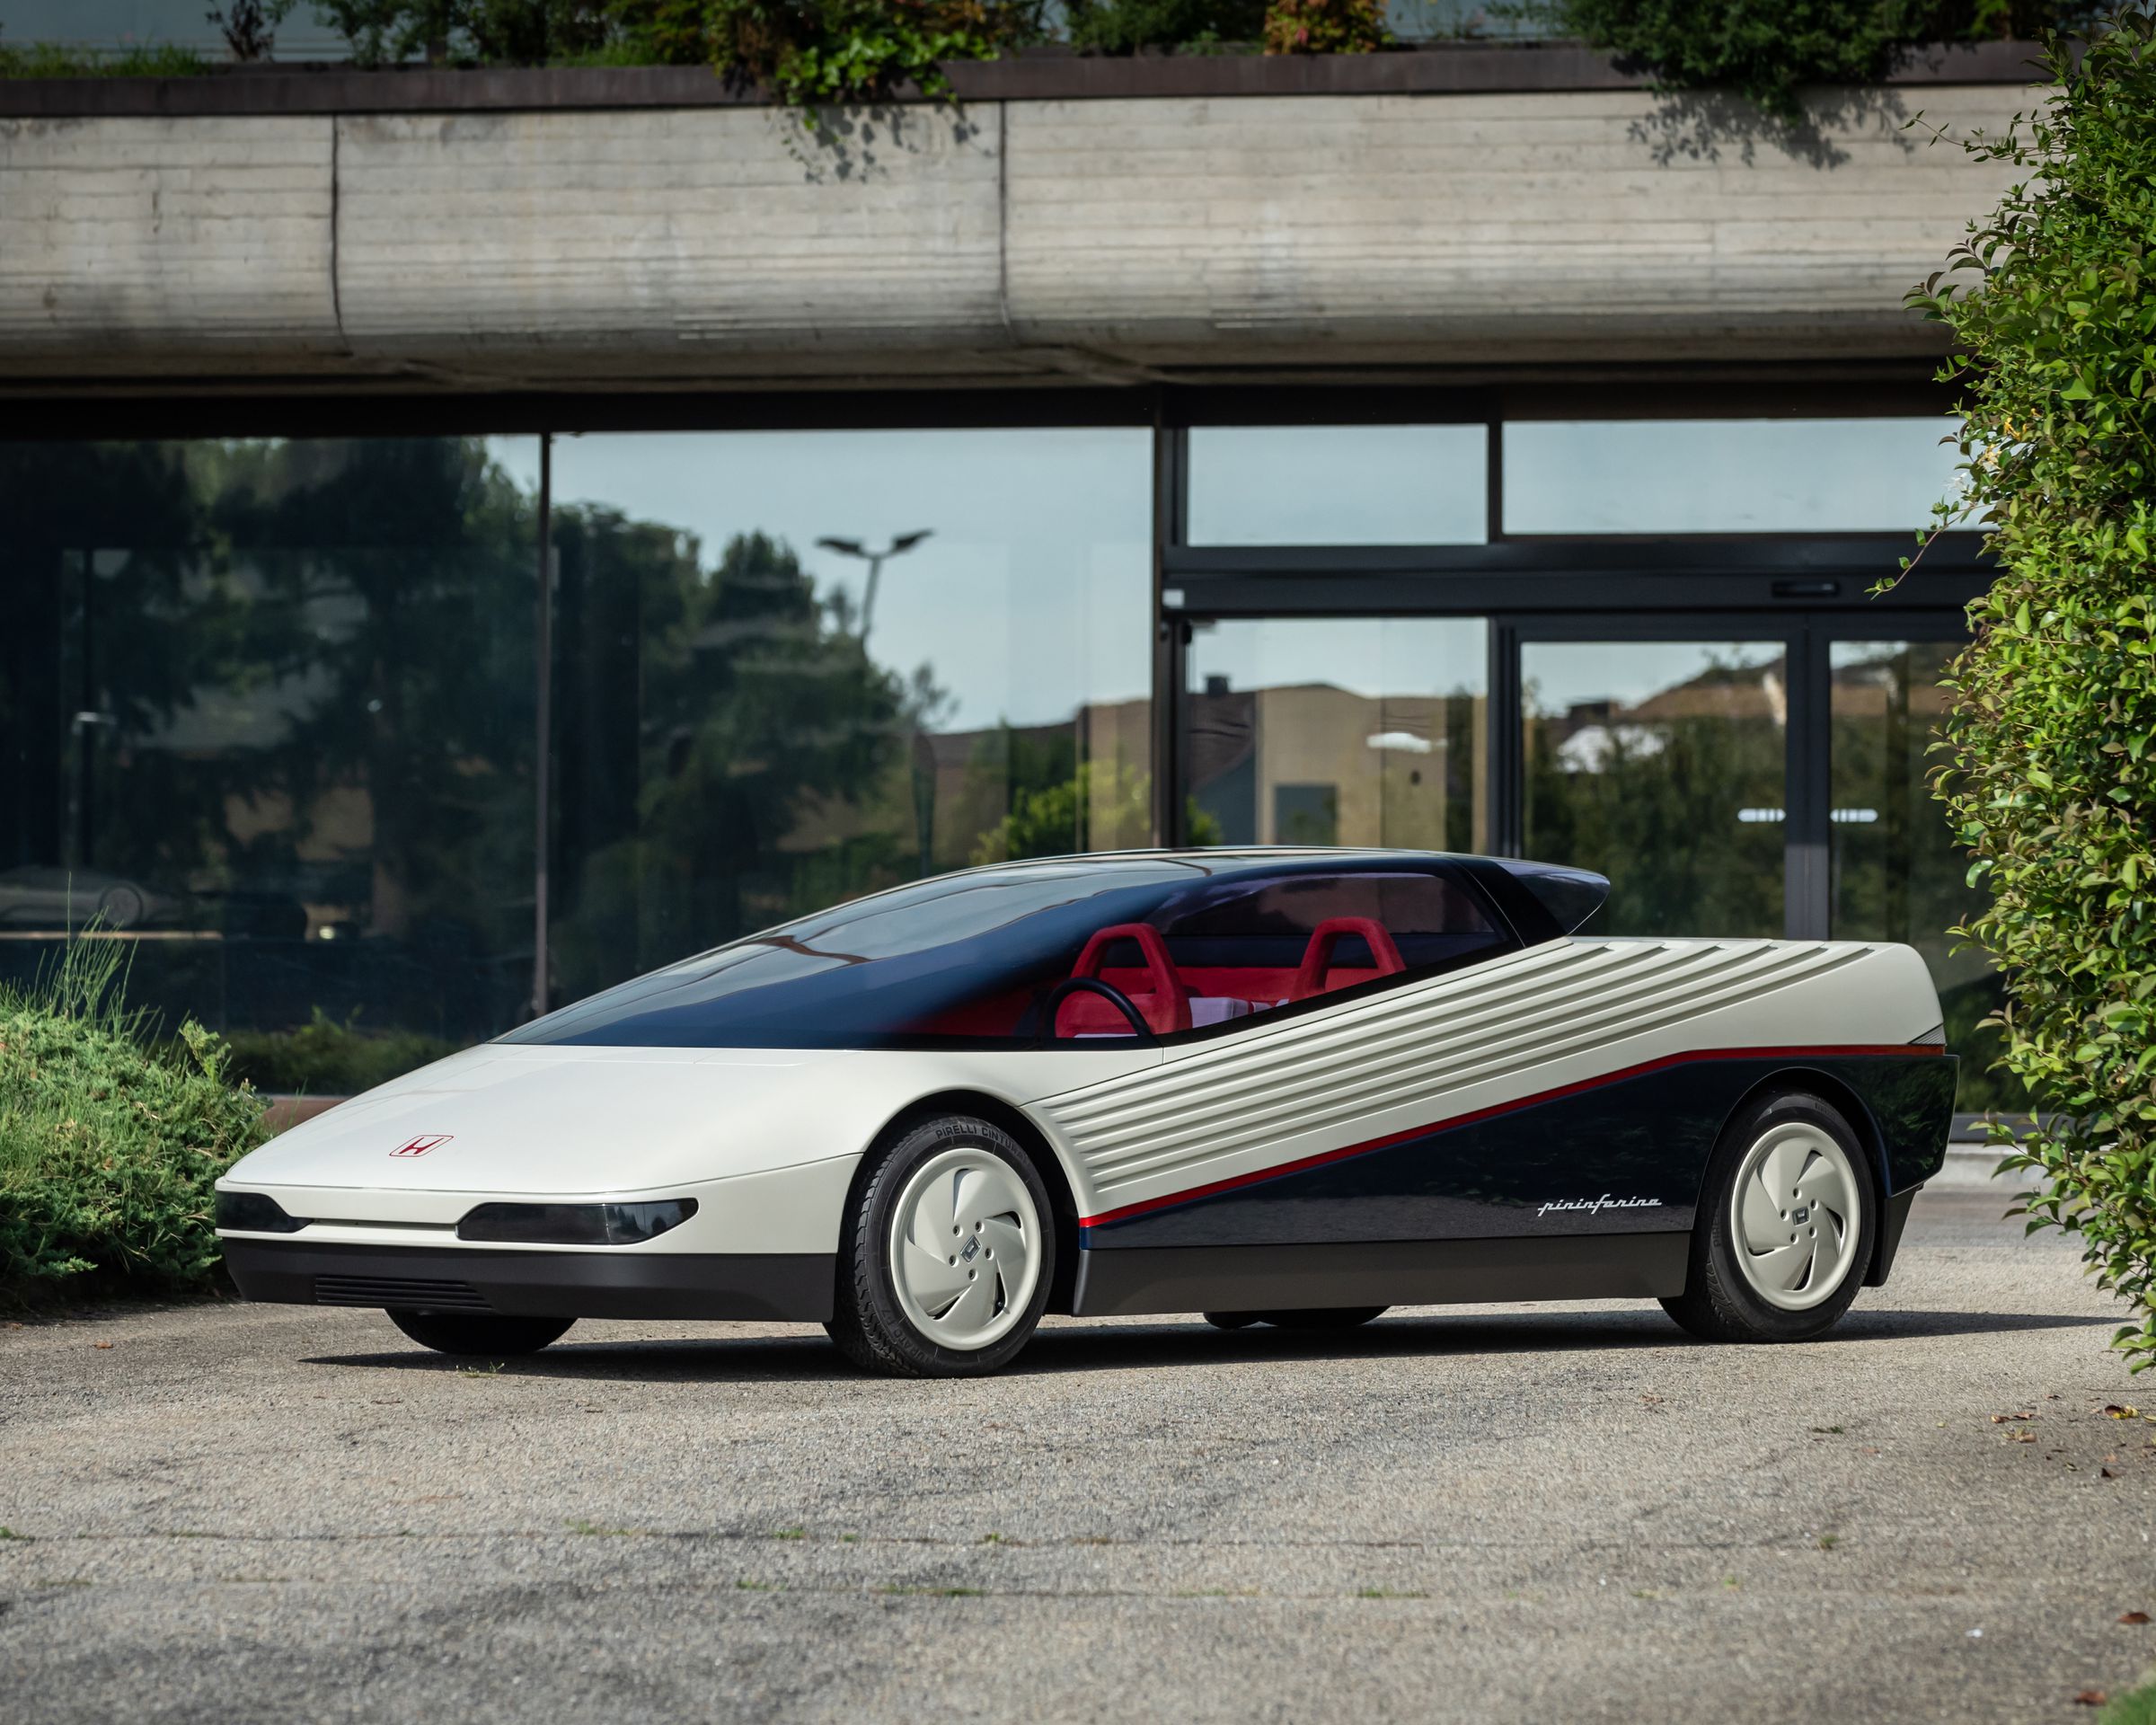 Wedge-shaped concept car photographed in front of a building